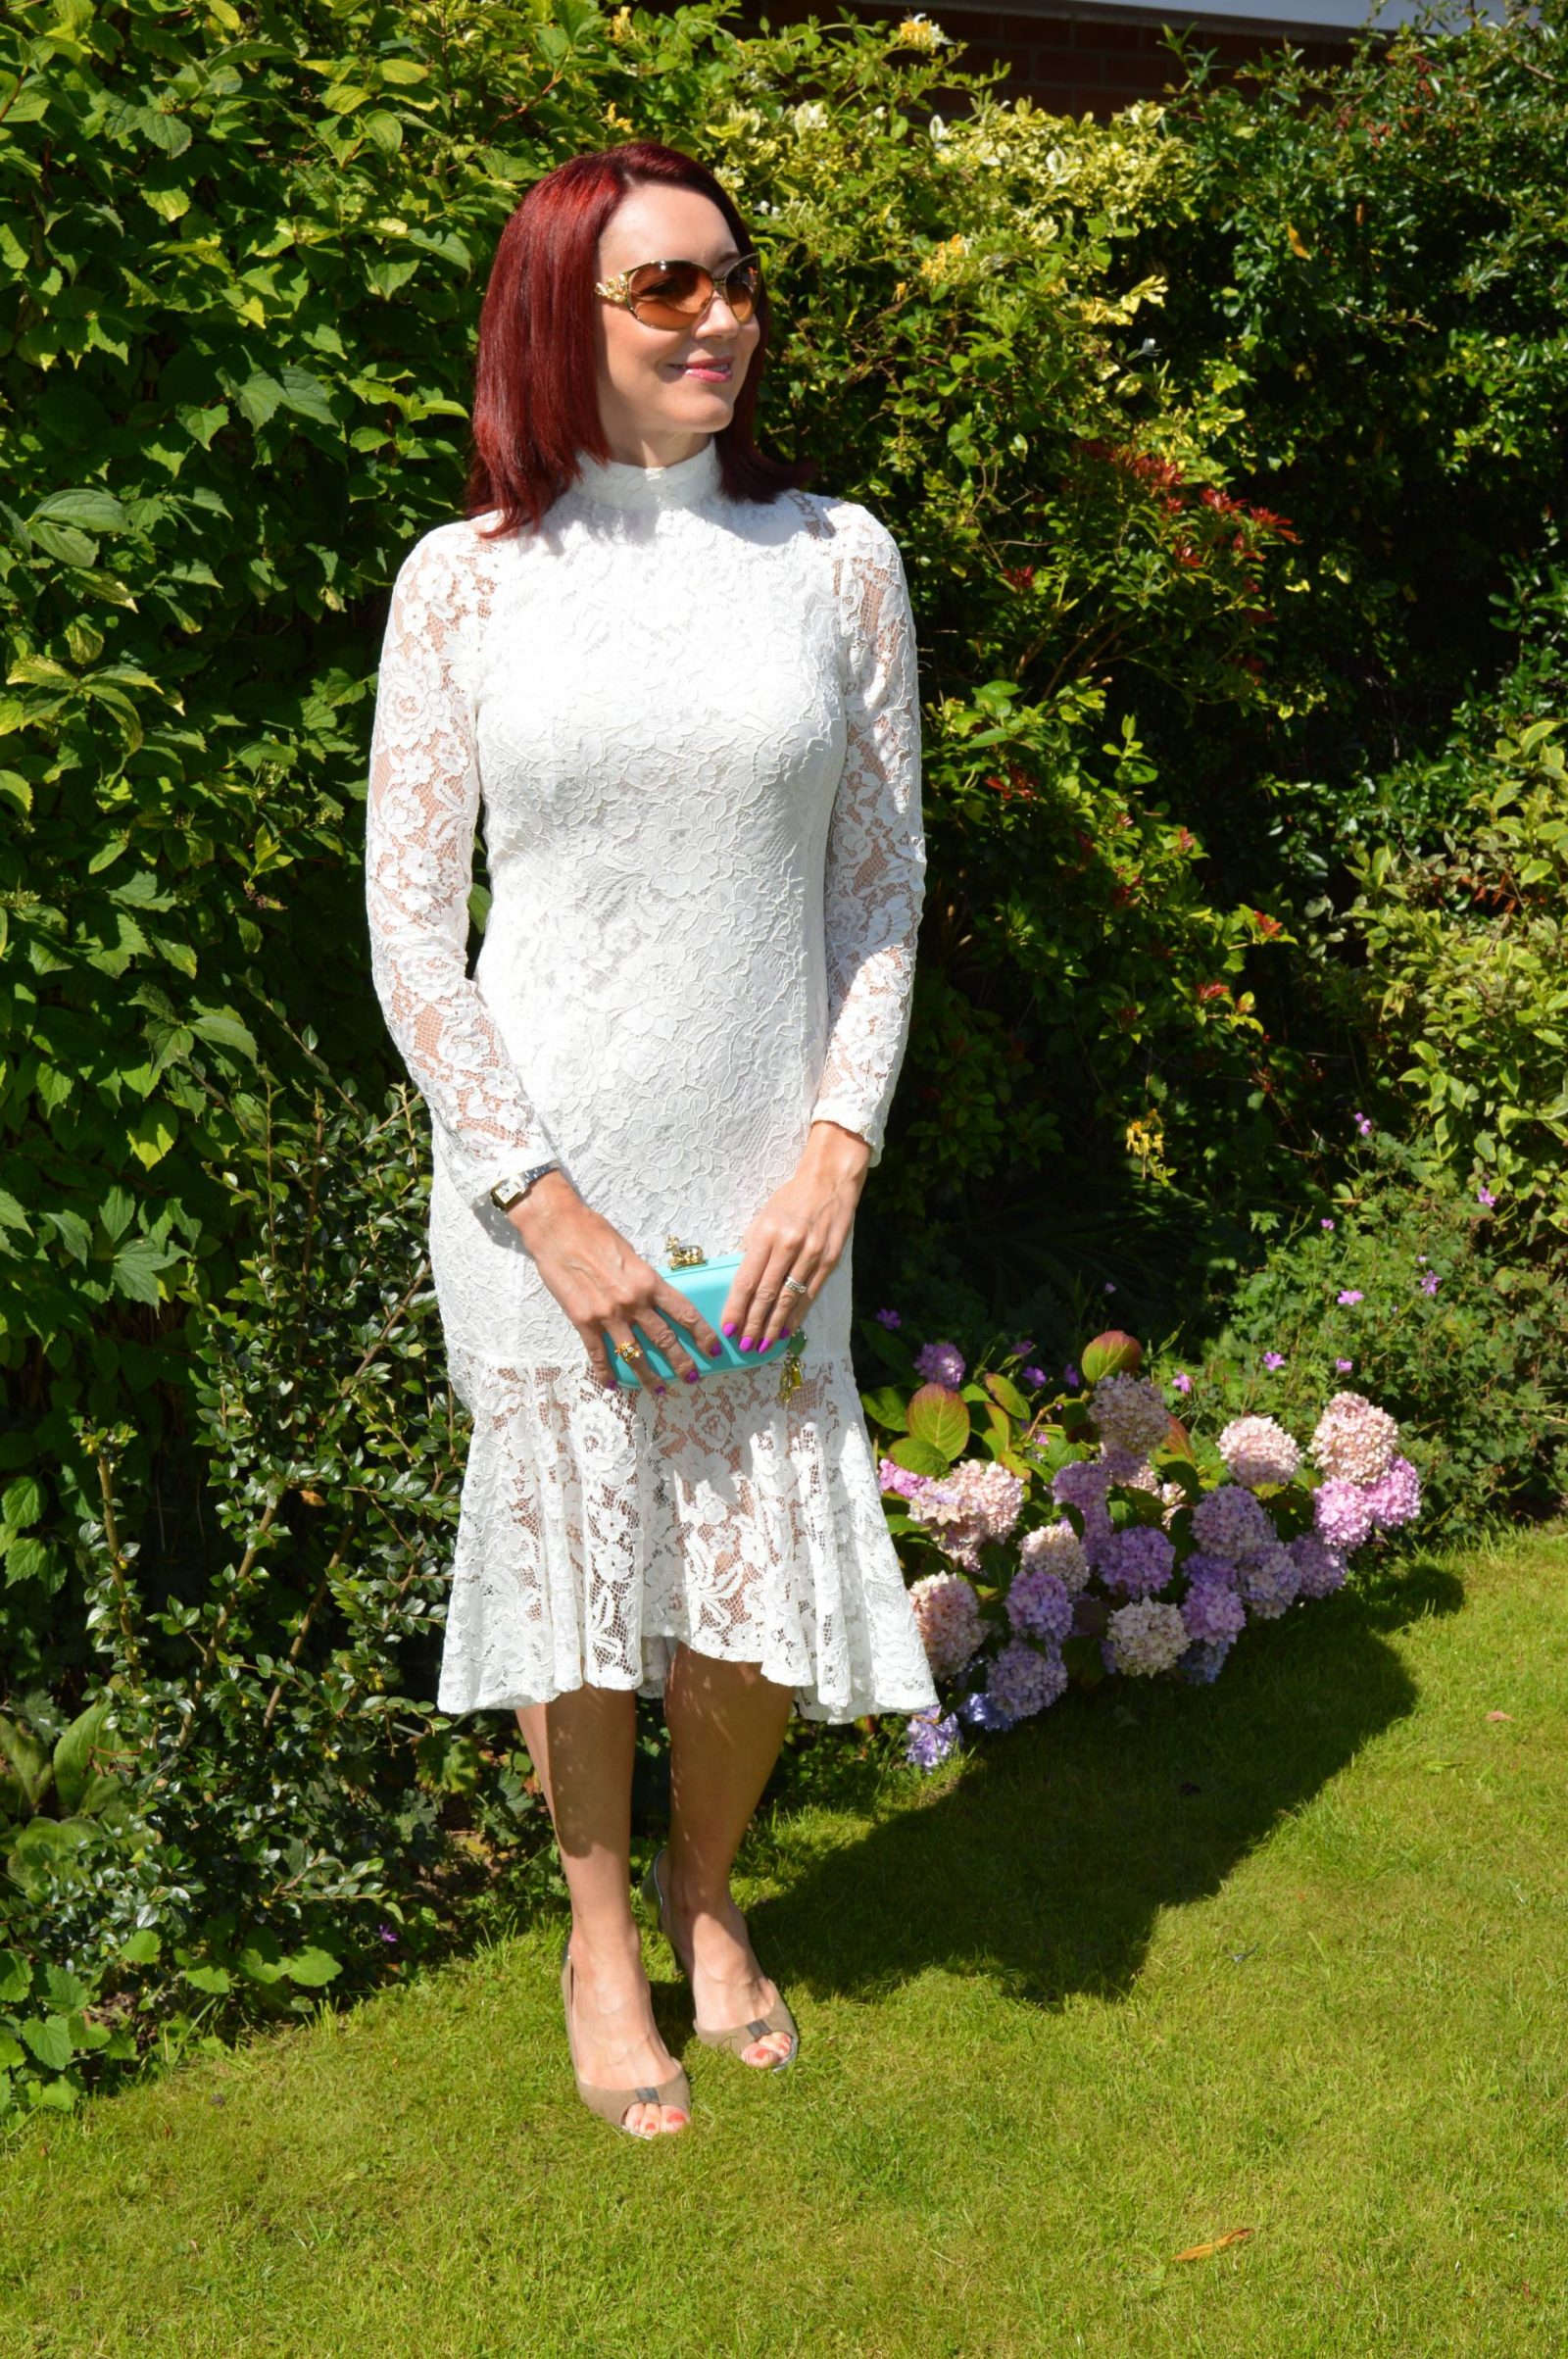 Wedding Guest Dresses From PrettyLittleThing Ellina white lace fishtail dress Anna Dello Russo H&M clutch bag